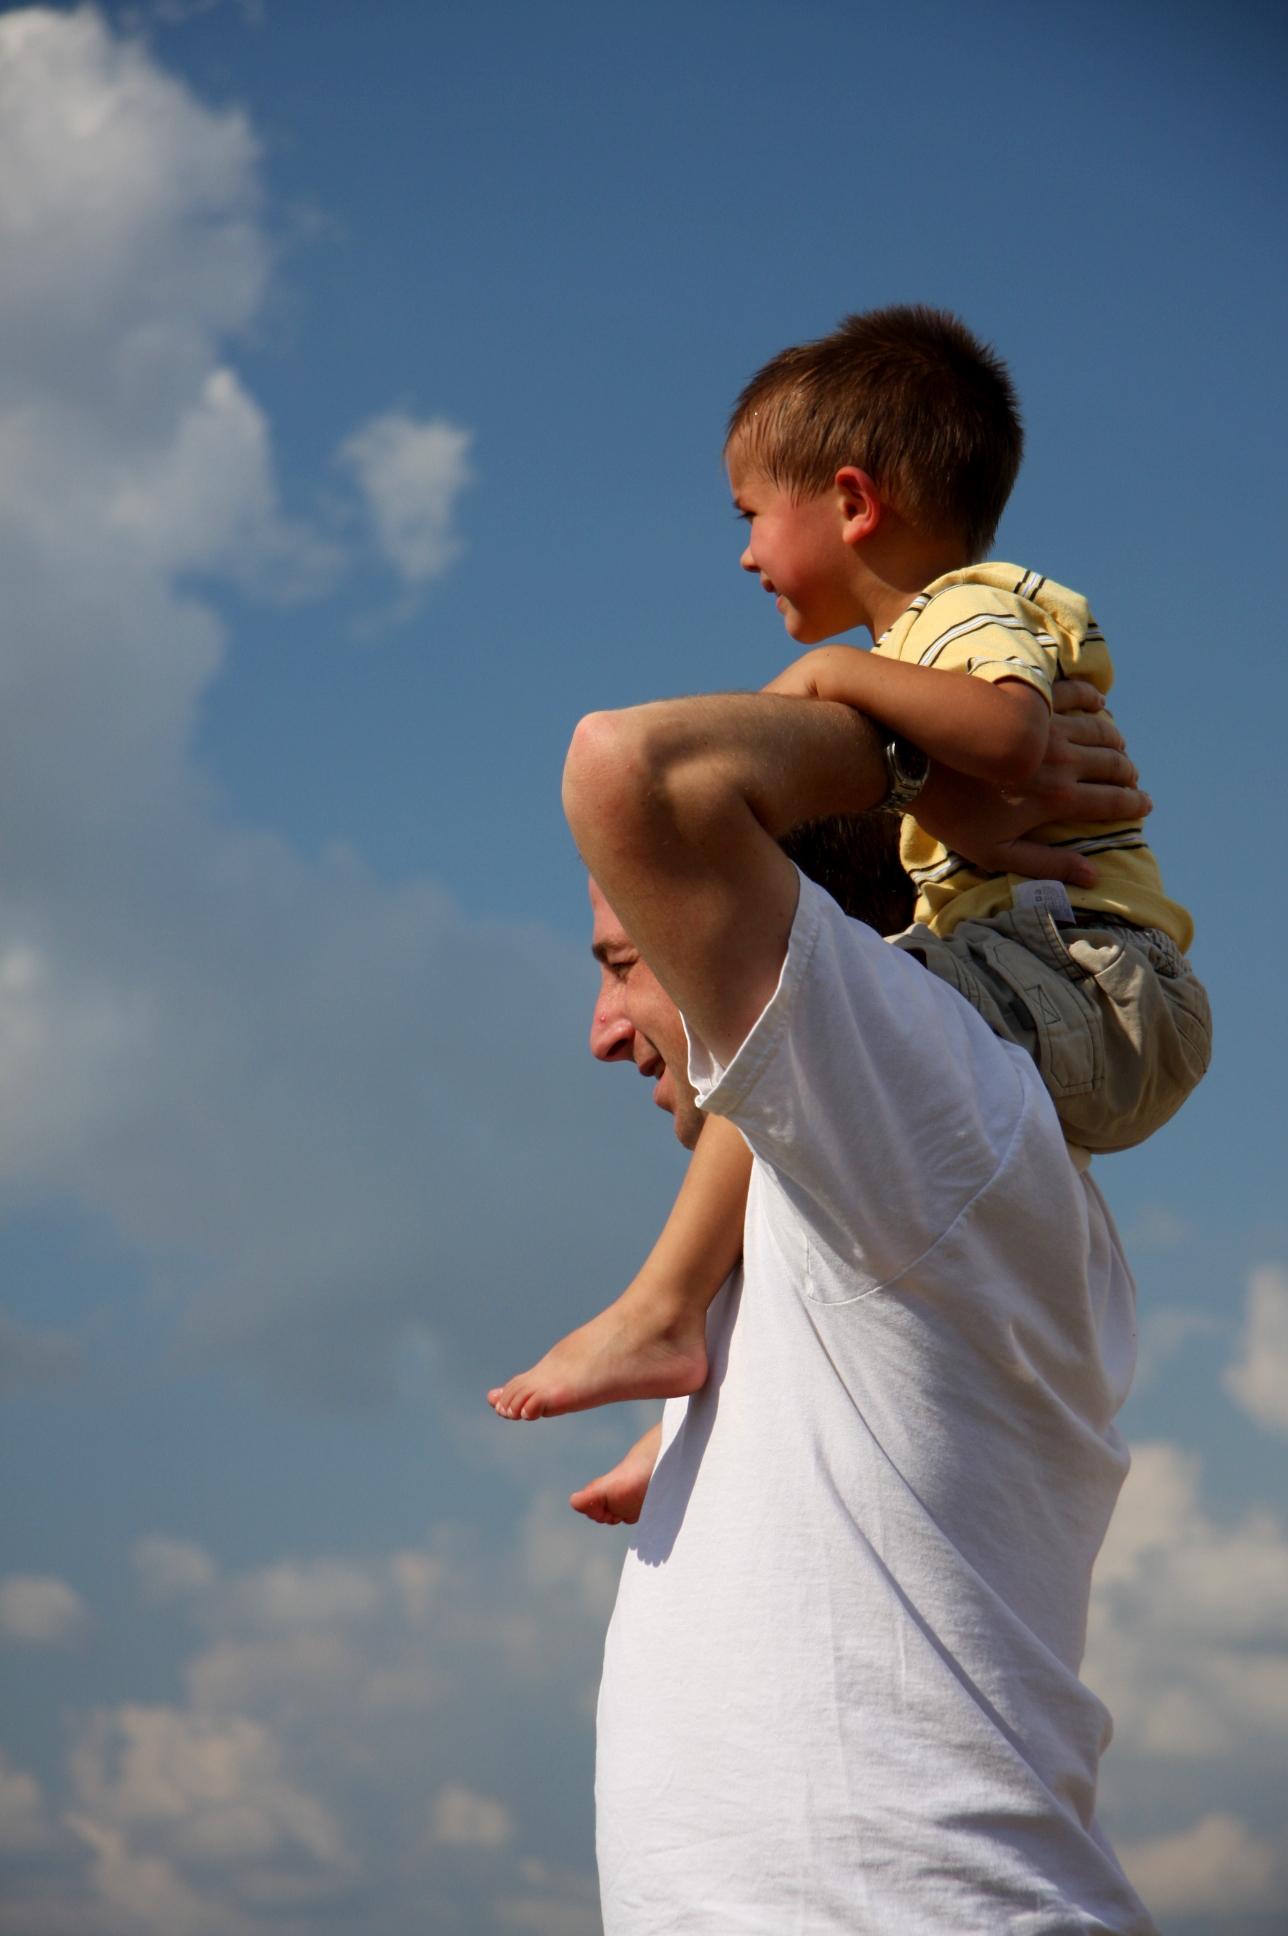 File:Flickr - eflon - Father and Son.jpg - Wikimedia Commons